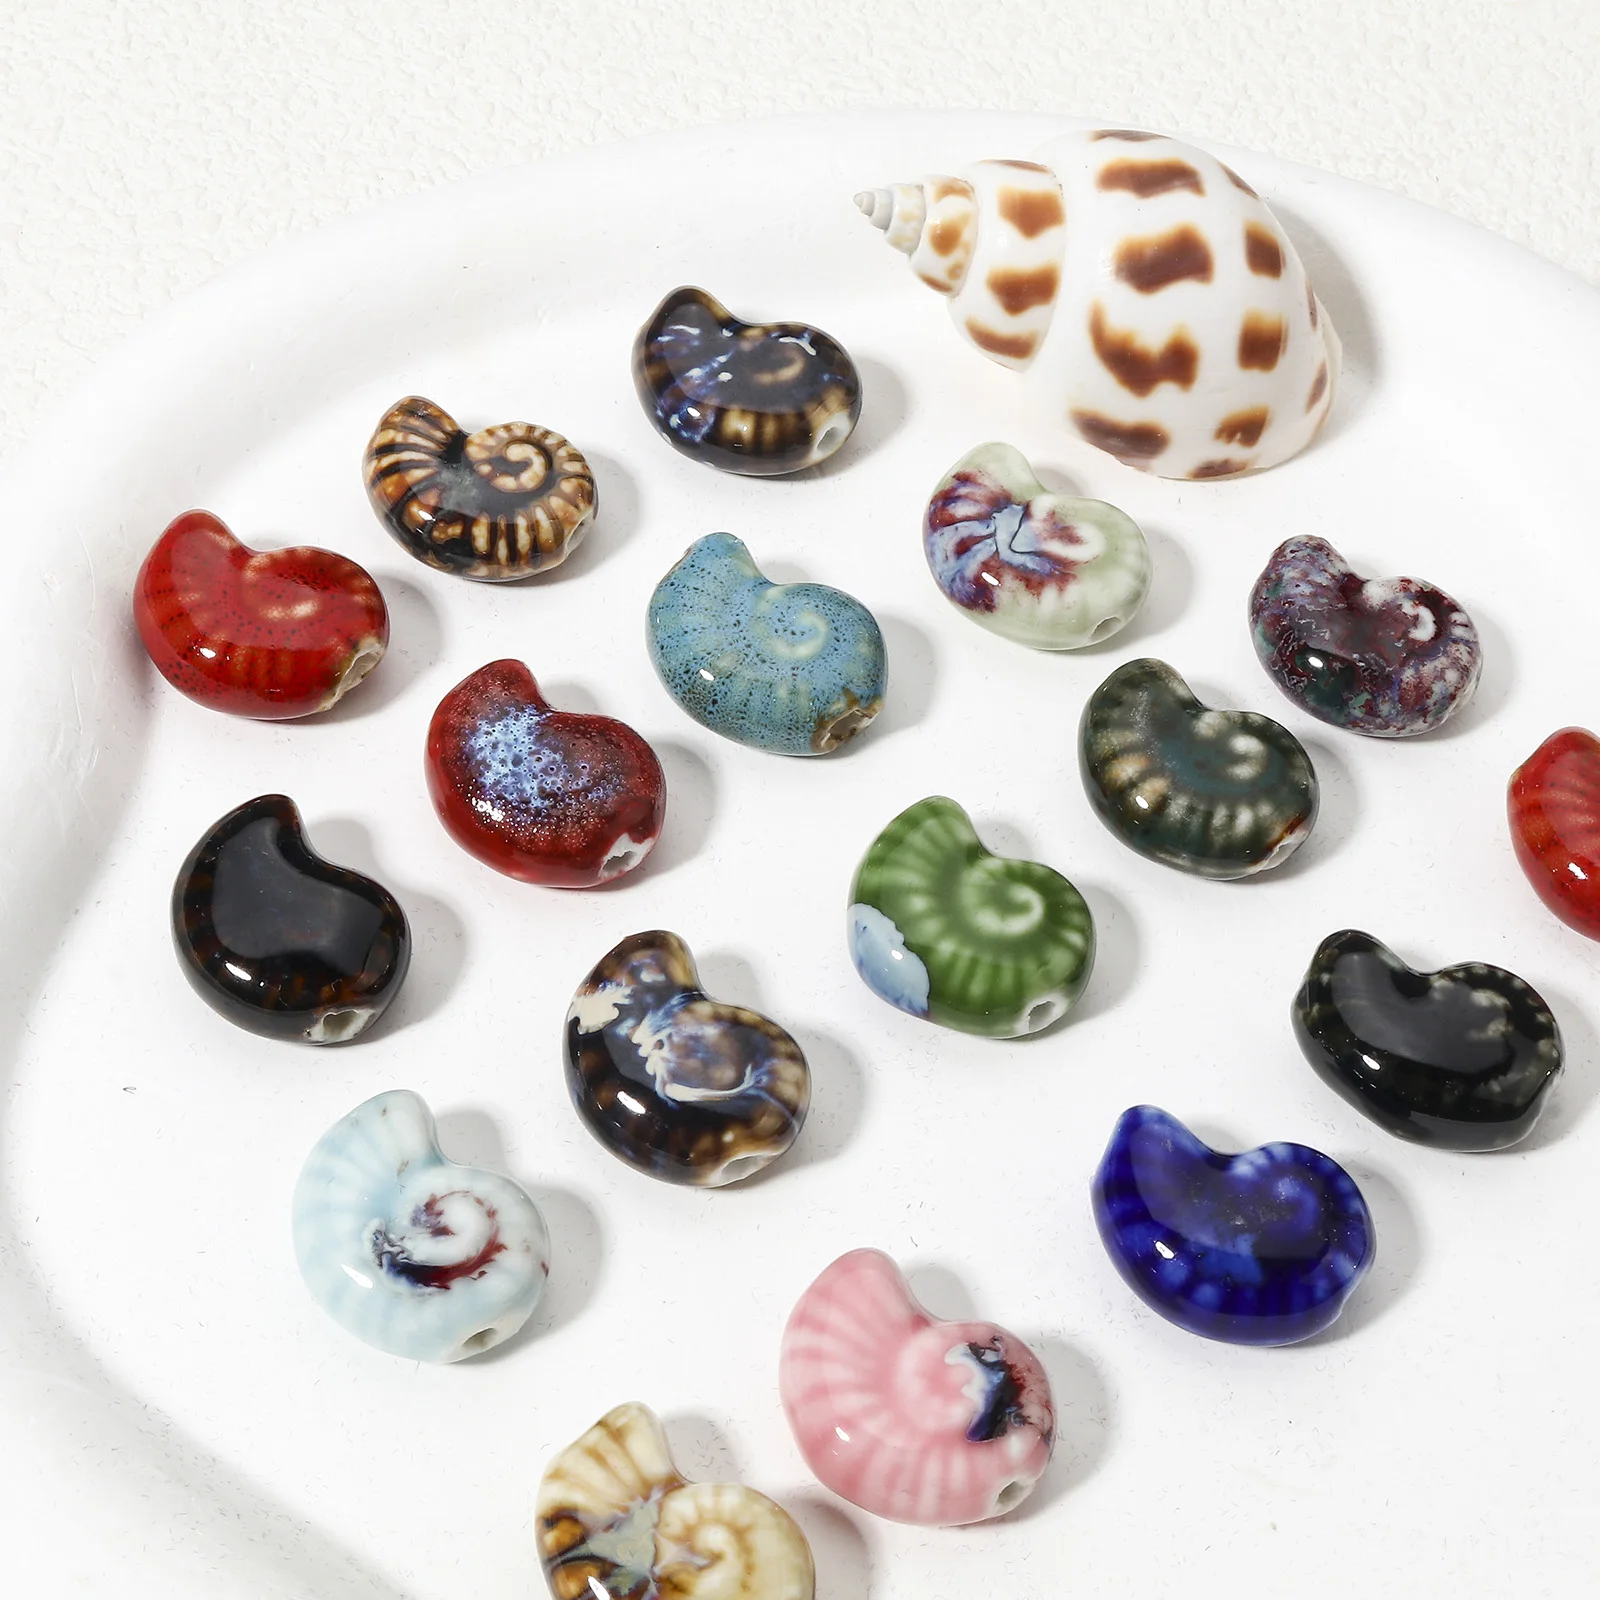 

10 PCs Ceramic 3D Beads For DIY Charm Jewelry Making Conch Sea Snail Multicolor Ocean Jewelry Beads 21mmx17mm, Hole: Approx 2mm